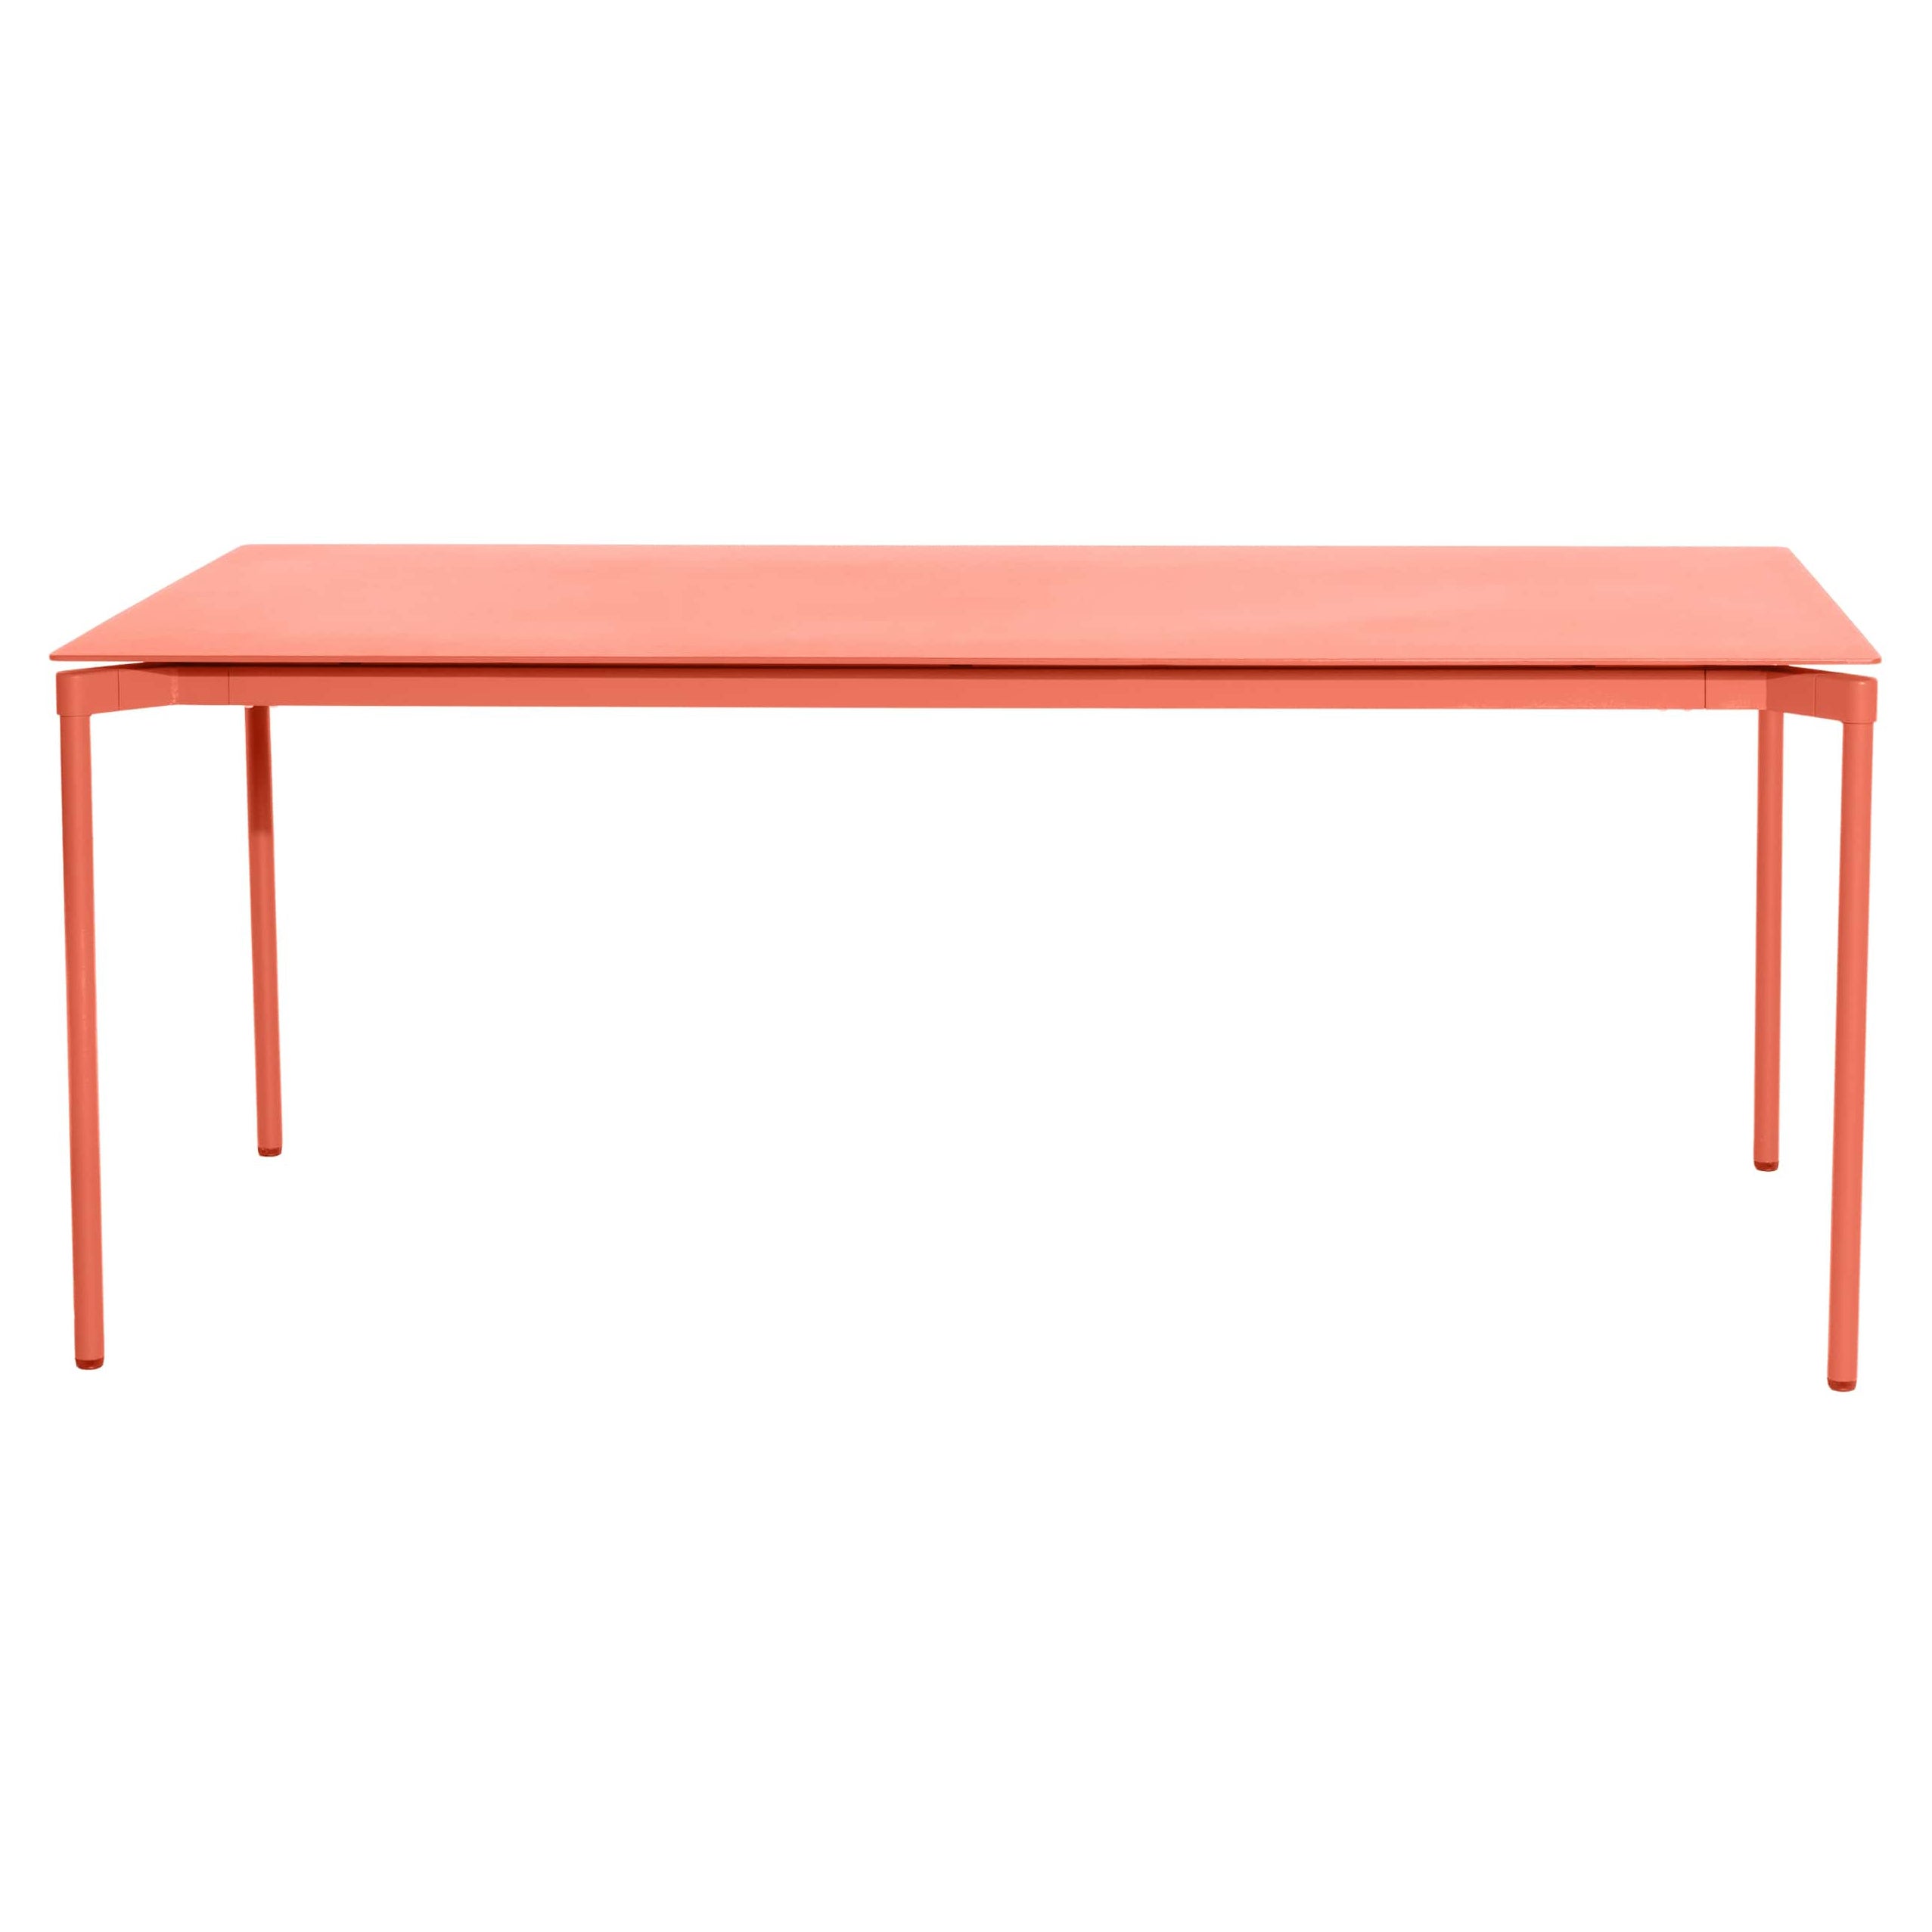 Petite Friture Fromme Rectangular Table in Coral Aluminium by Tom Chung For Sale